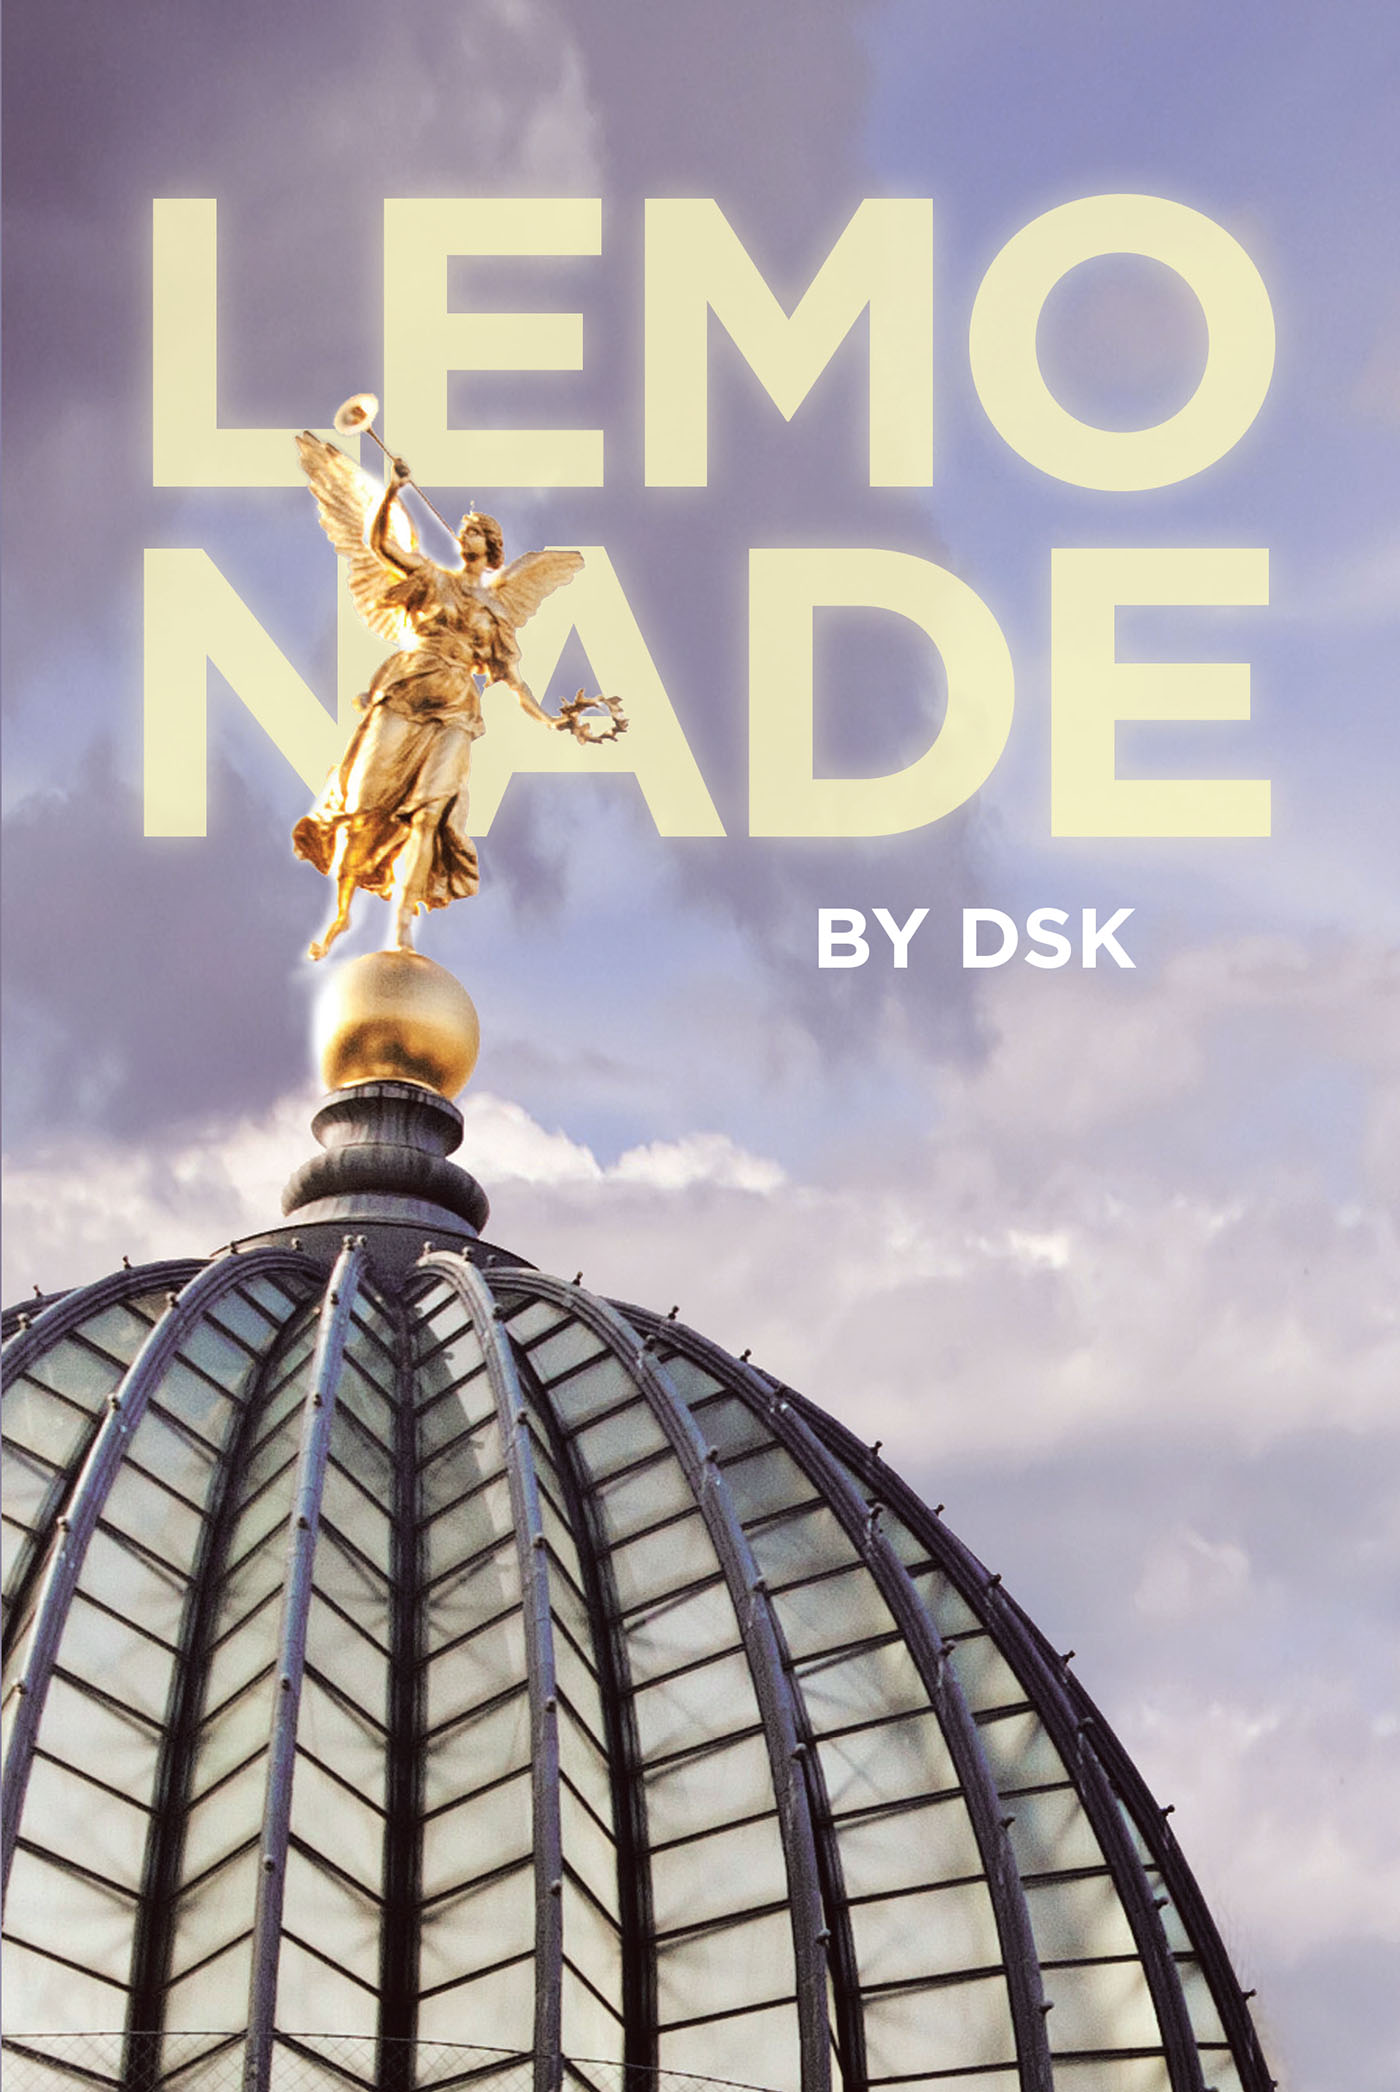 Author DSK’s New Book, "Lemonade," is a Deeply Descriptive and Eye-Opening Written Testament to the Author’s Survival Overcoming His Trauma